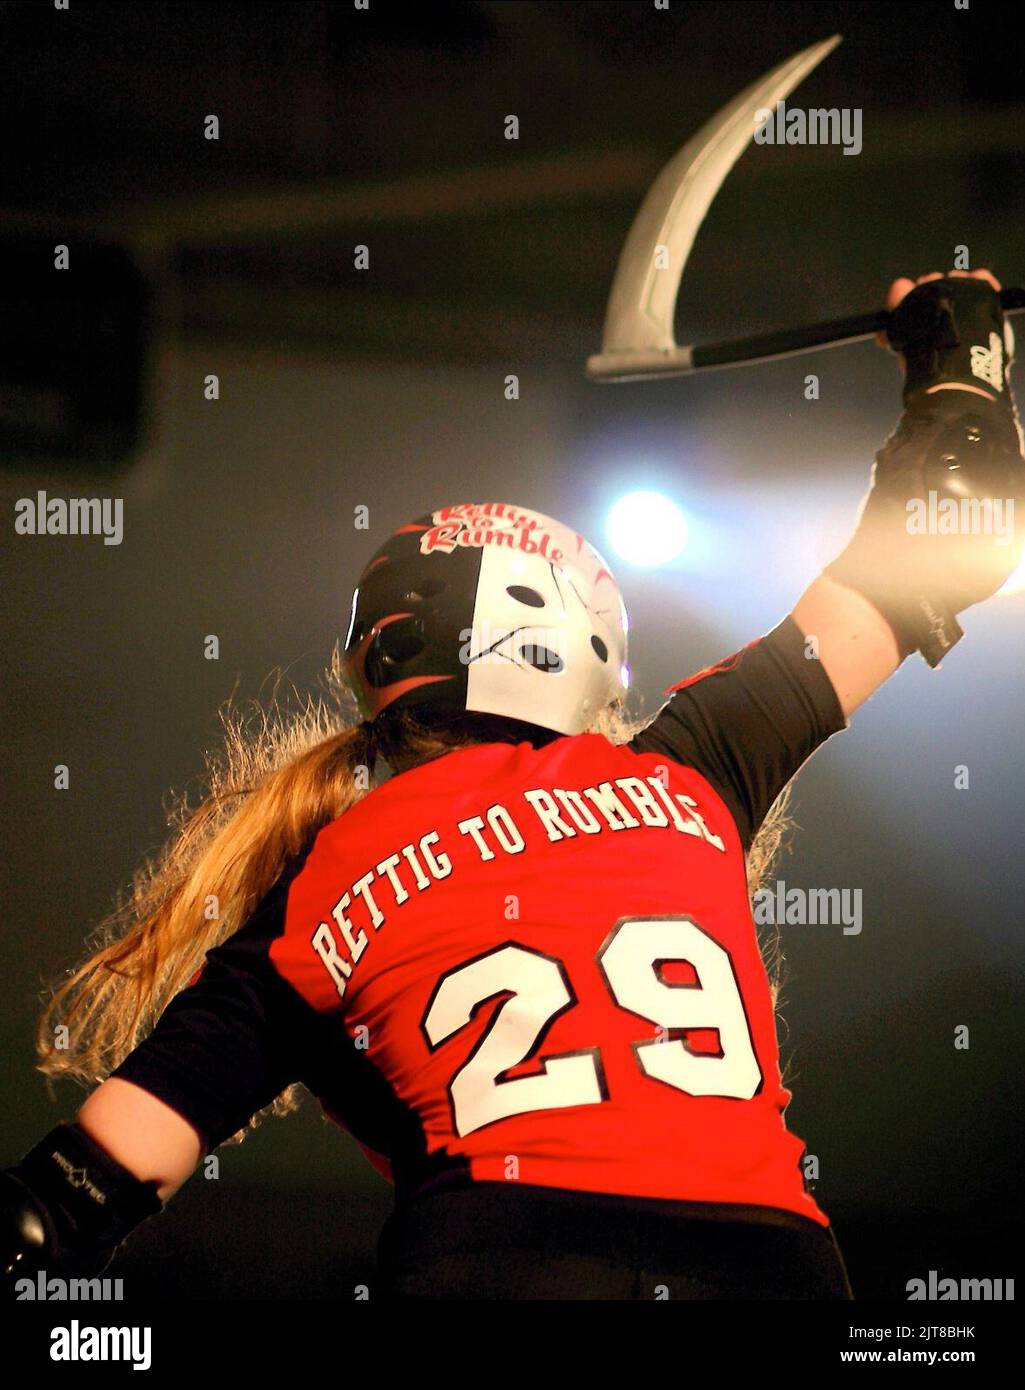 RETTIG TO RUMBLE, BLOOD ON THE FLAT TRACK: THE RISE OF THE RAT CITY ROLLERGIRLS, 2007 Stock Photo